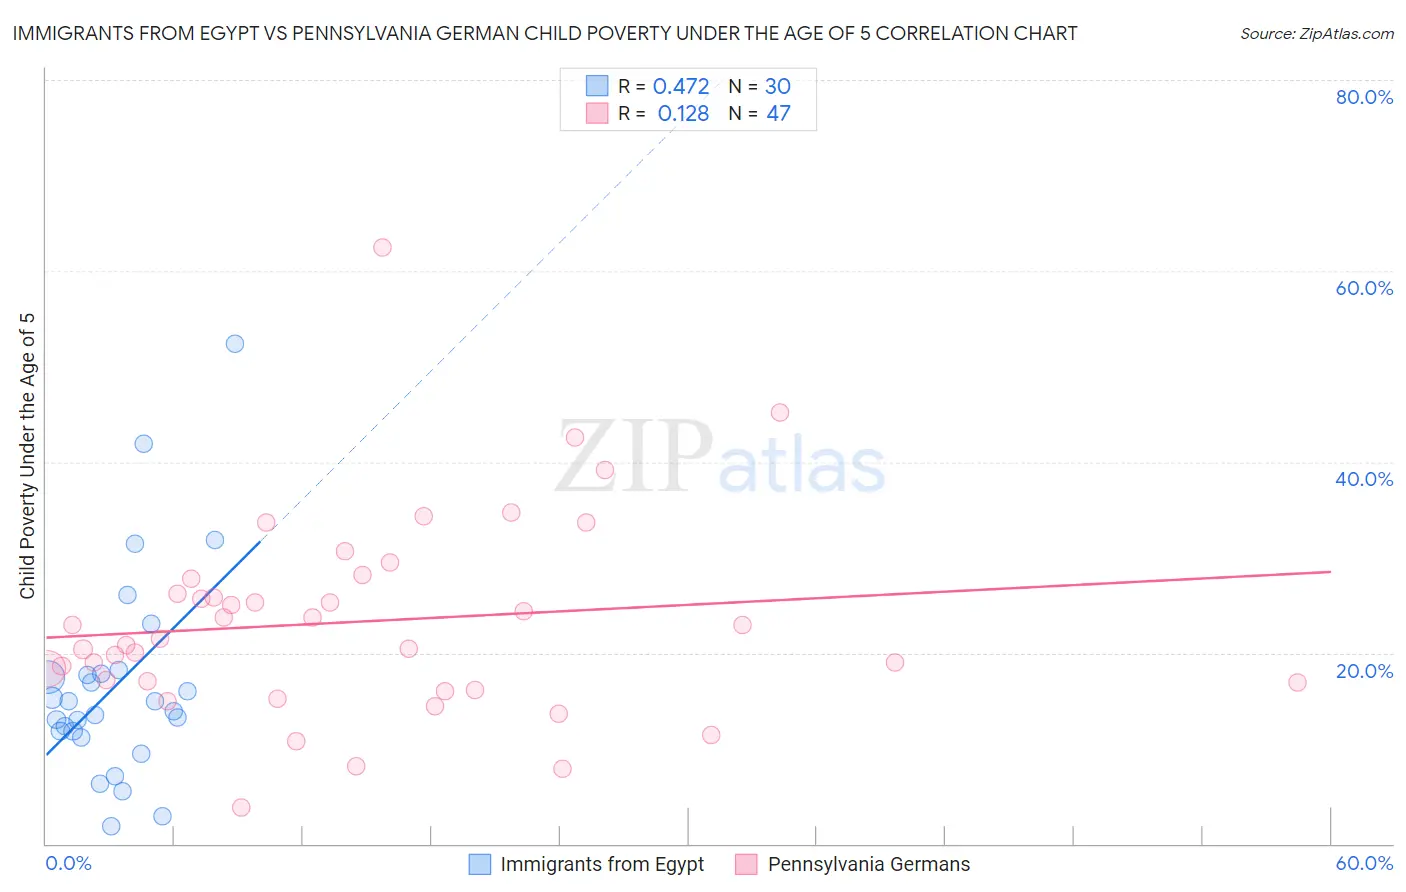 Immigrants from Egypt vs Pennsylvania German Child Poverty Under the Age of 5